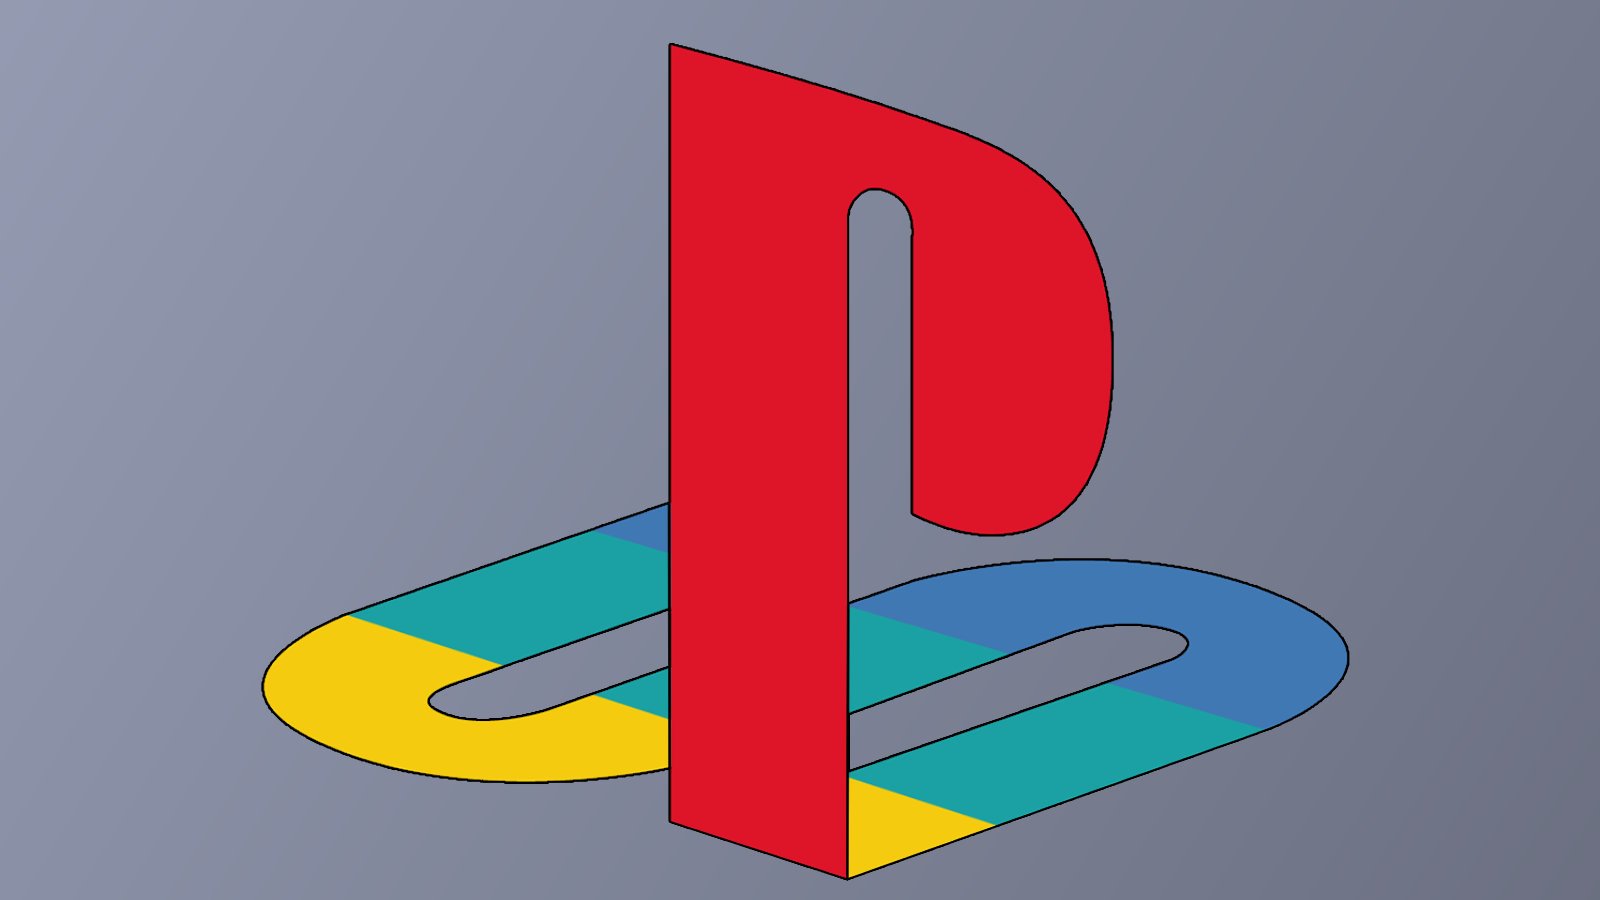 Retiring PlayStation CEO gets a PS1-style PS5 that’s not for sale